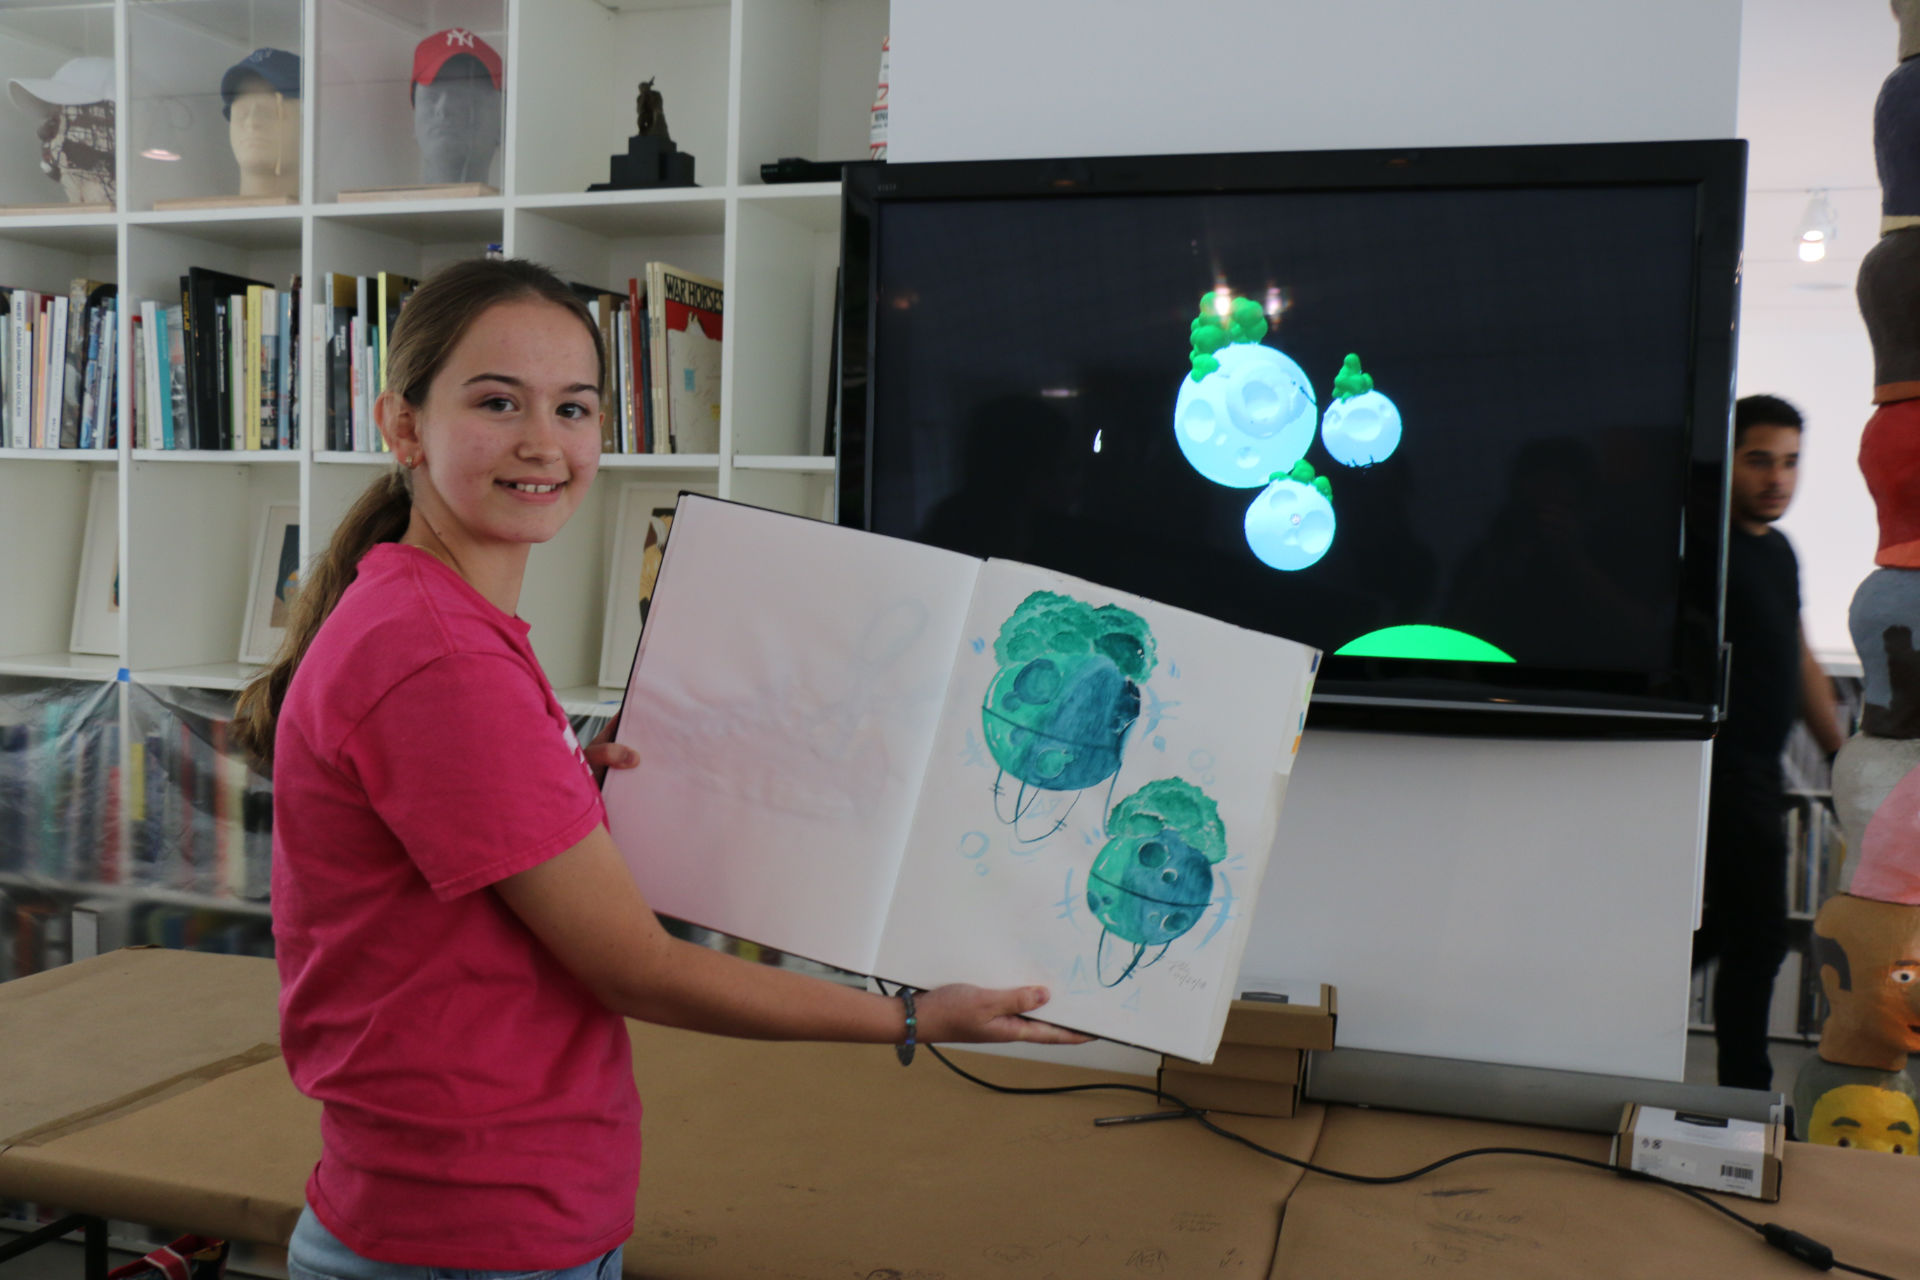 A girl showing a drawing in a notebook in front of the 3D version of the same drawing in a screen.